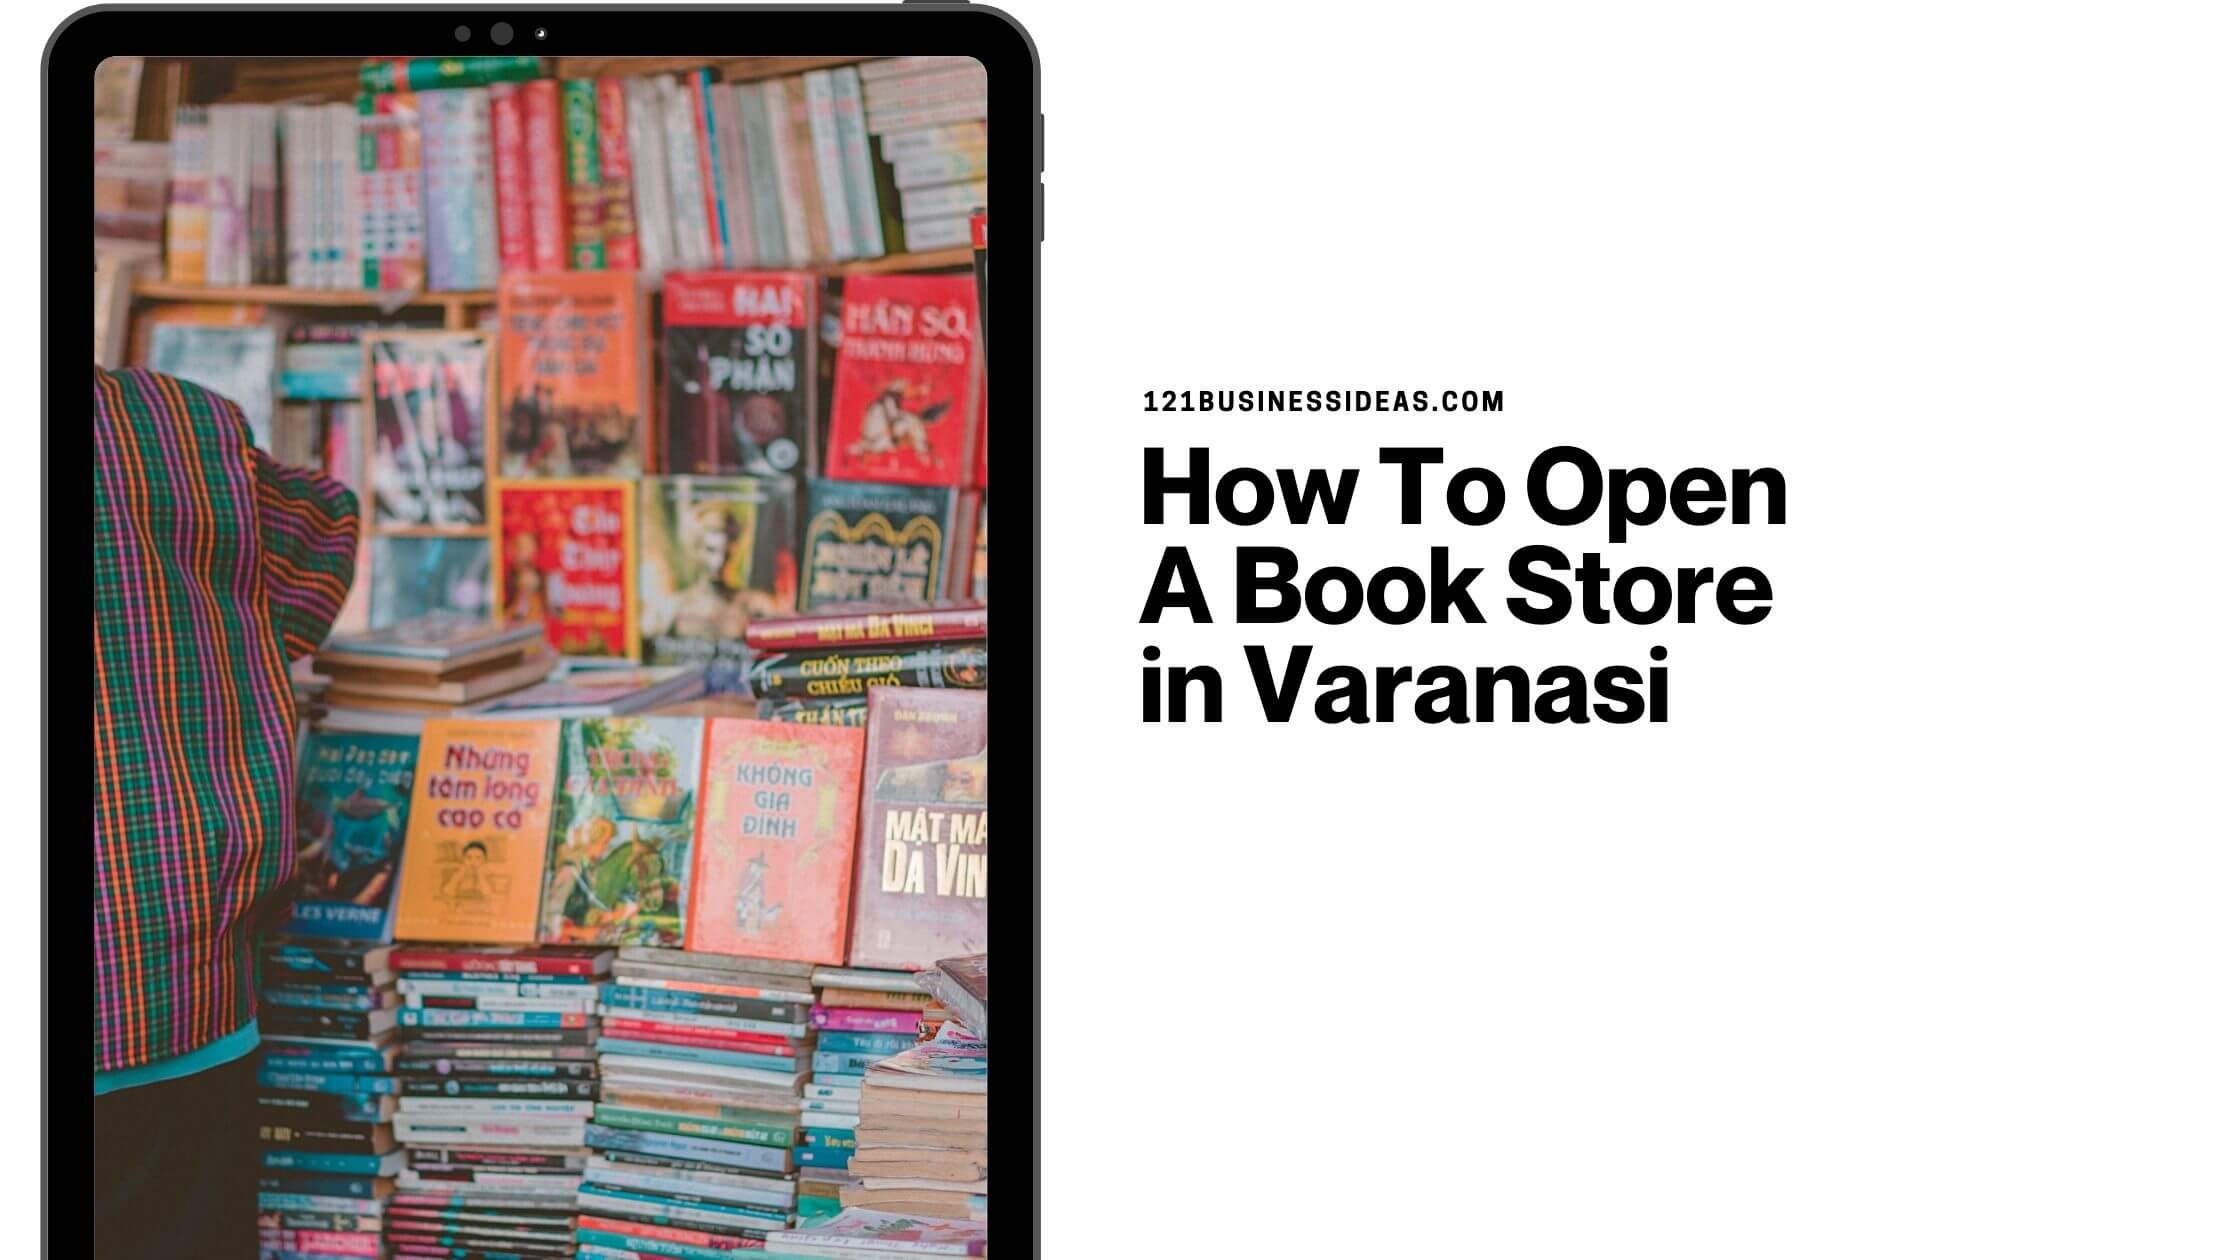 How To Open A Book Store in Varanasi (1)